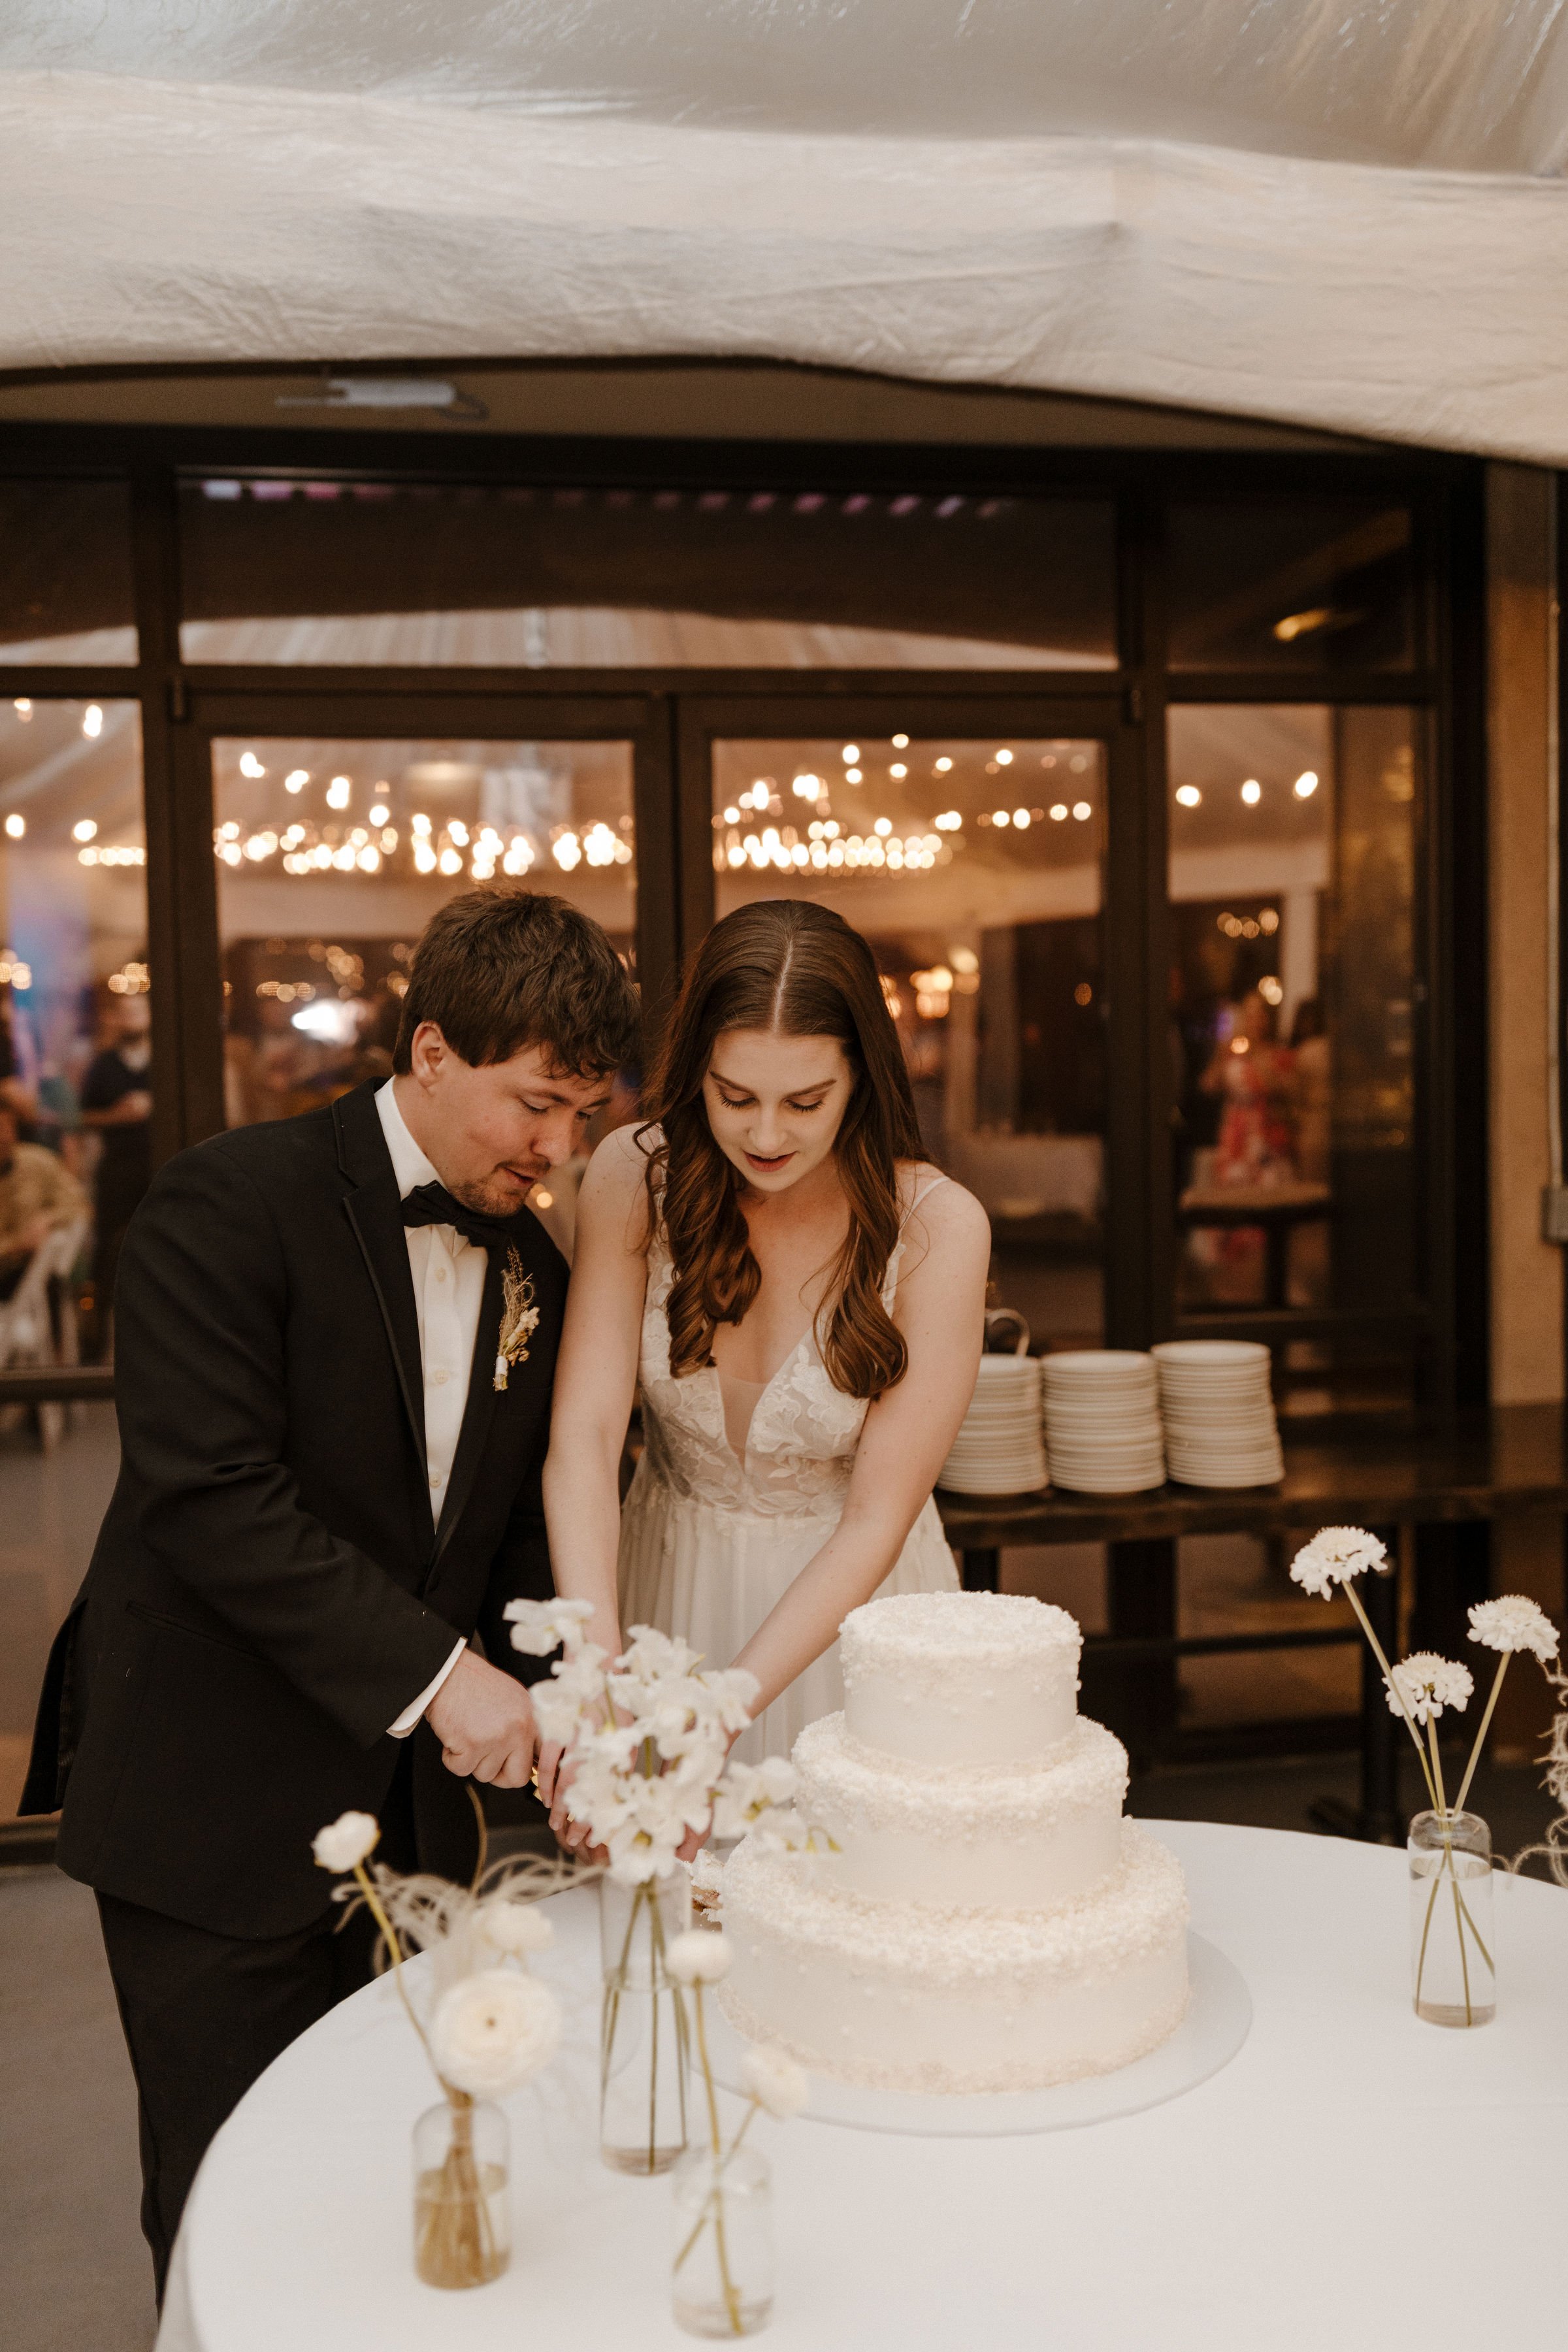 cute wedding couple cutting the cake at thier ceremony featuring cambria by jenny by jenny yoo